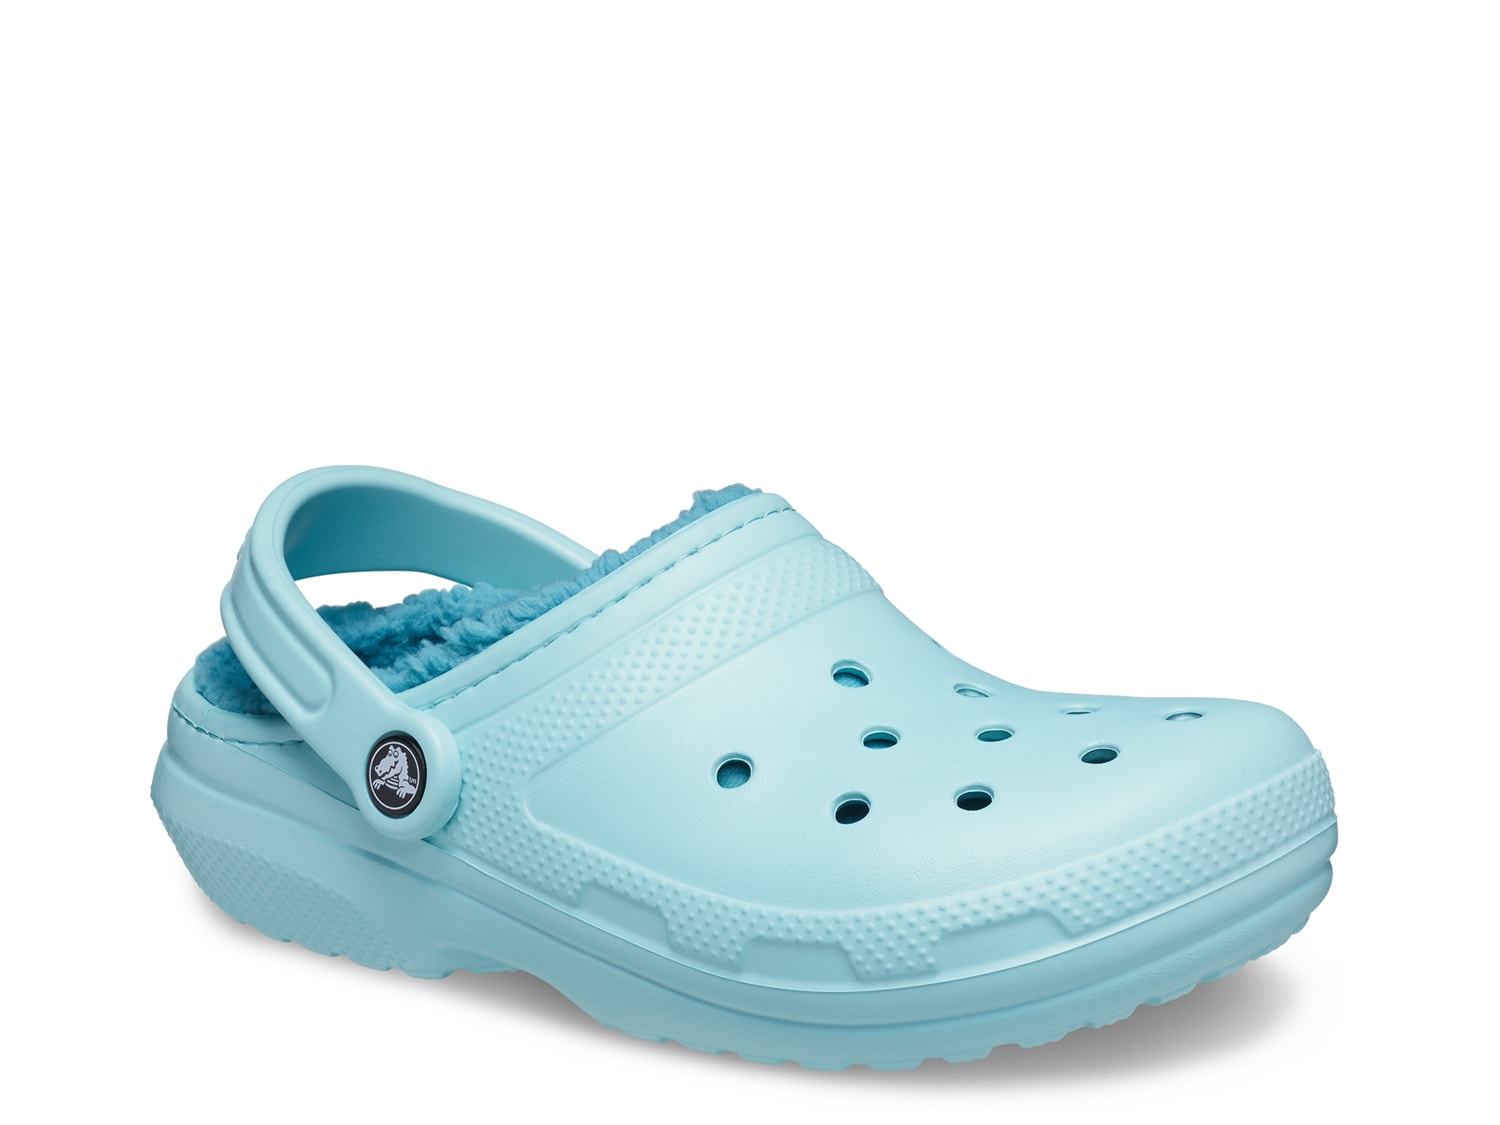 Crocs Classic Lined Clog - Men's - Free Shipping | DSW